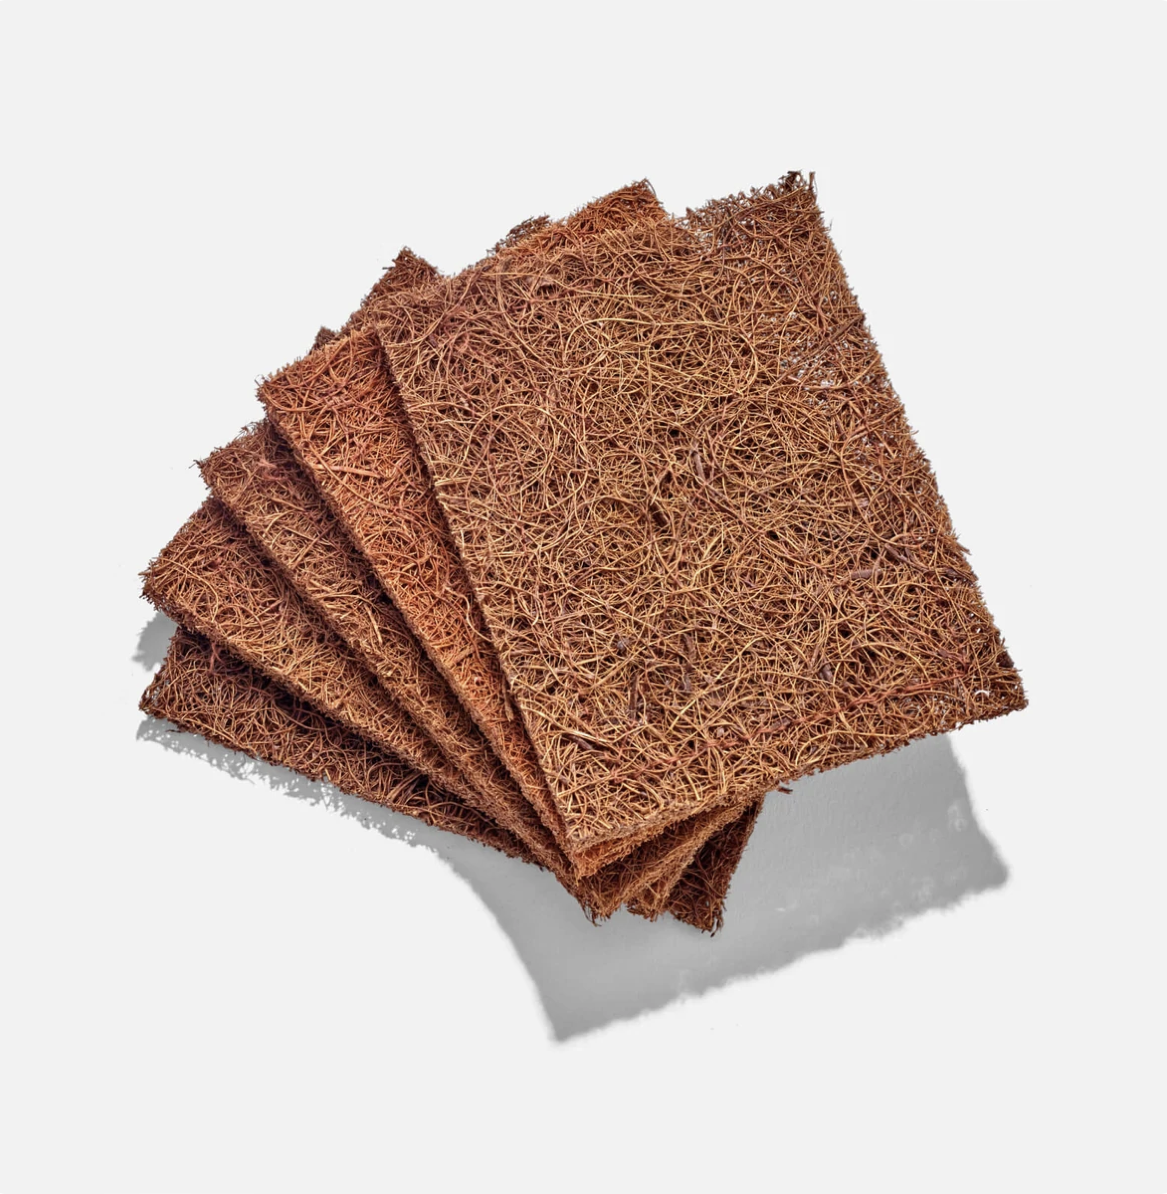 Biodegradable Coconut Kitchen Scrubbers - Pack of 5